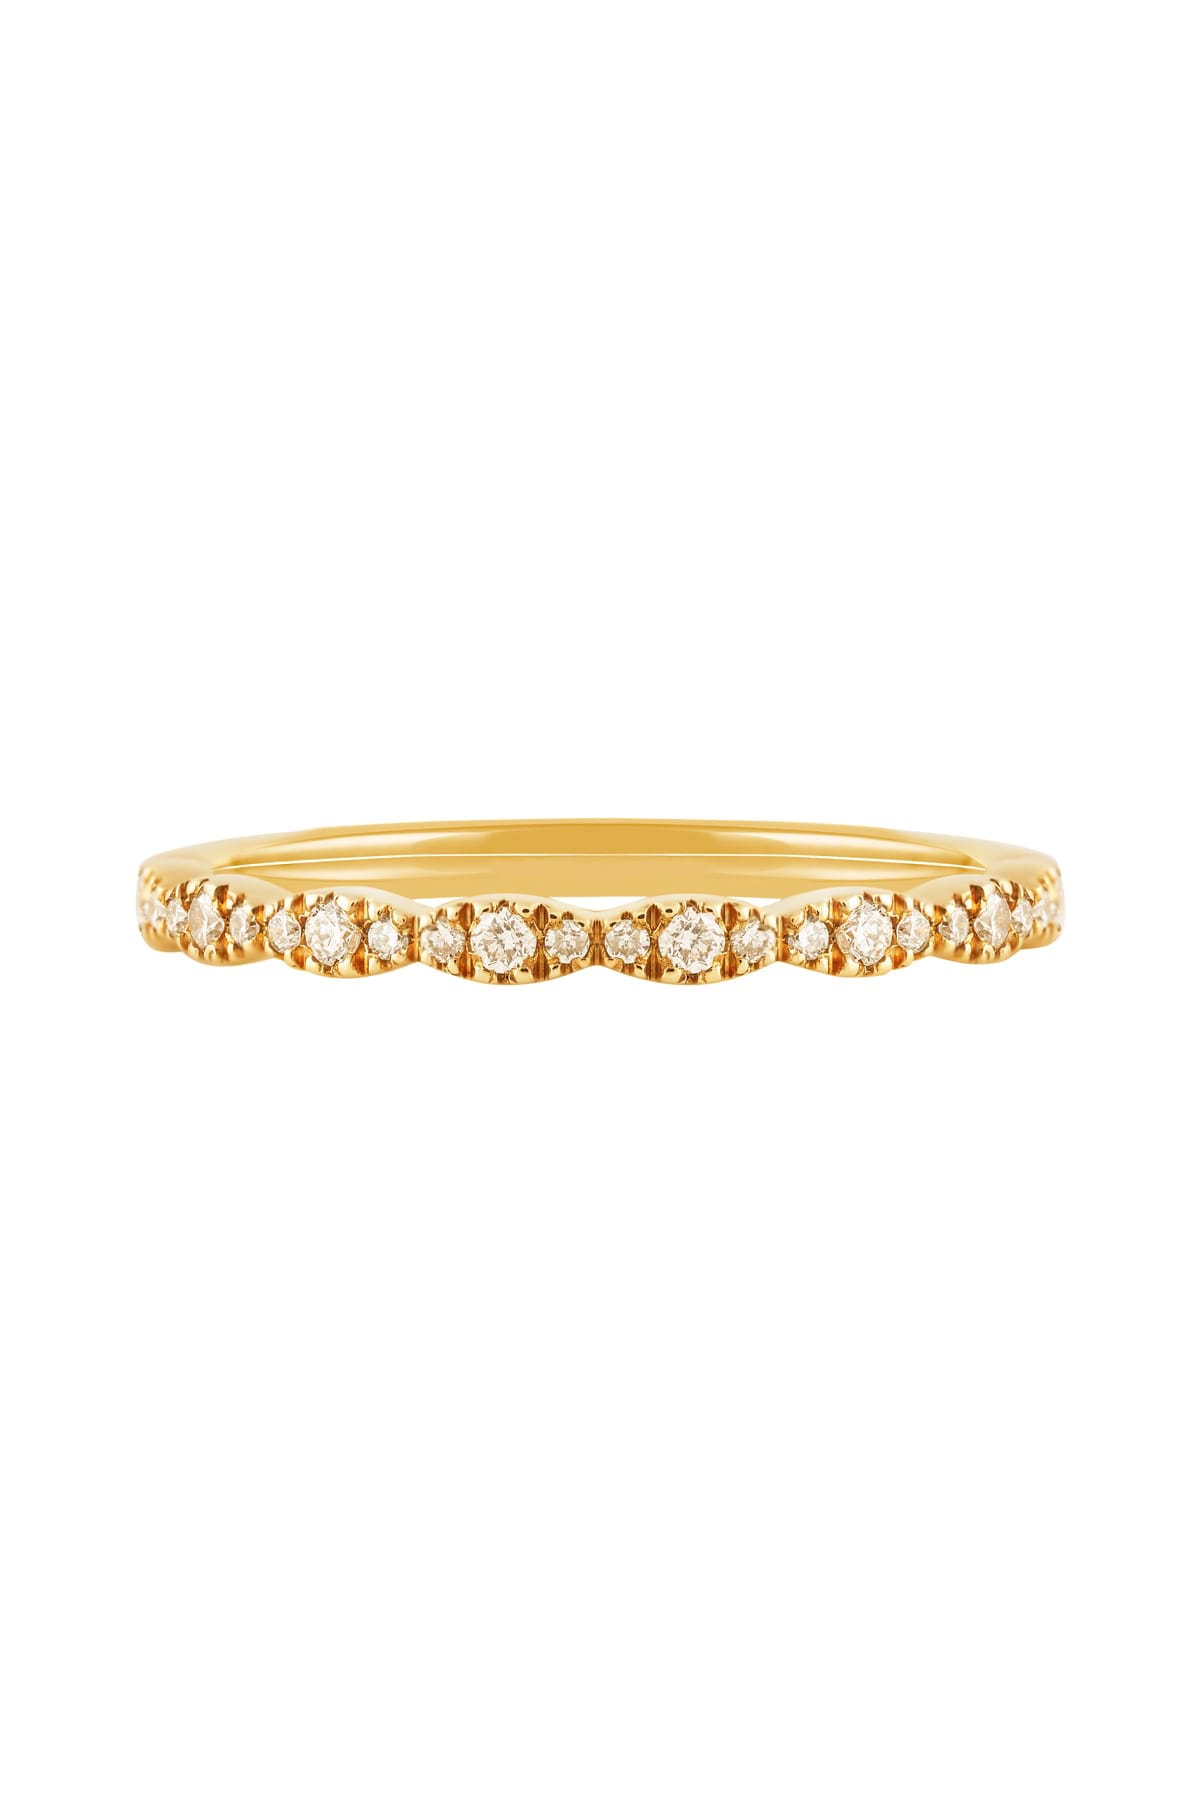 9ct yellow gold fine scalloped shape diamond band with 24 x round brilliant cut diamonds totalling 0.24ct G SI quality available at LeGassick.